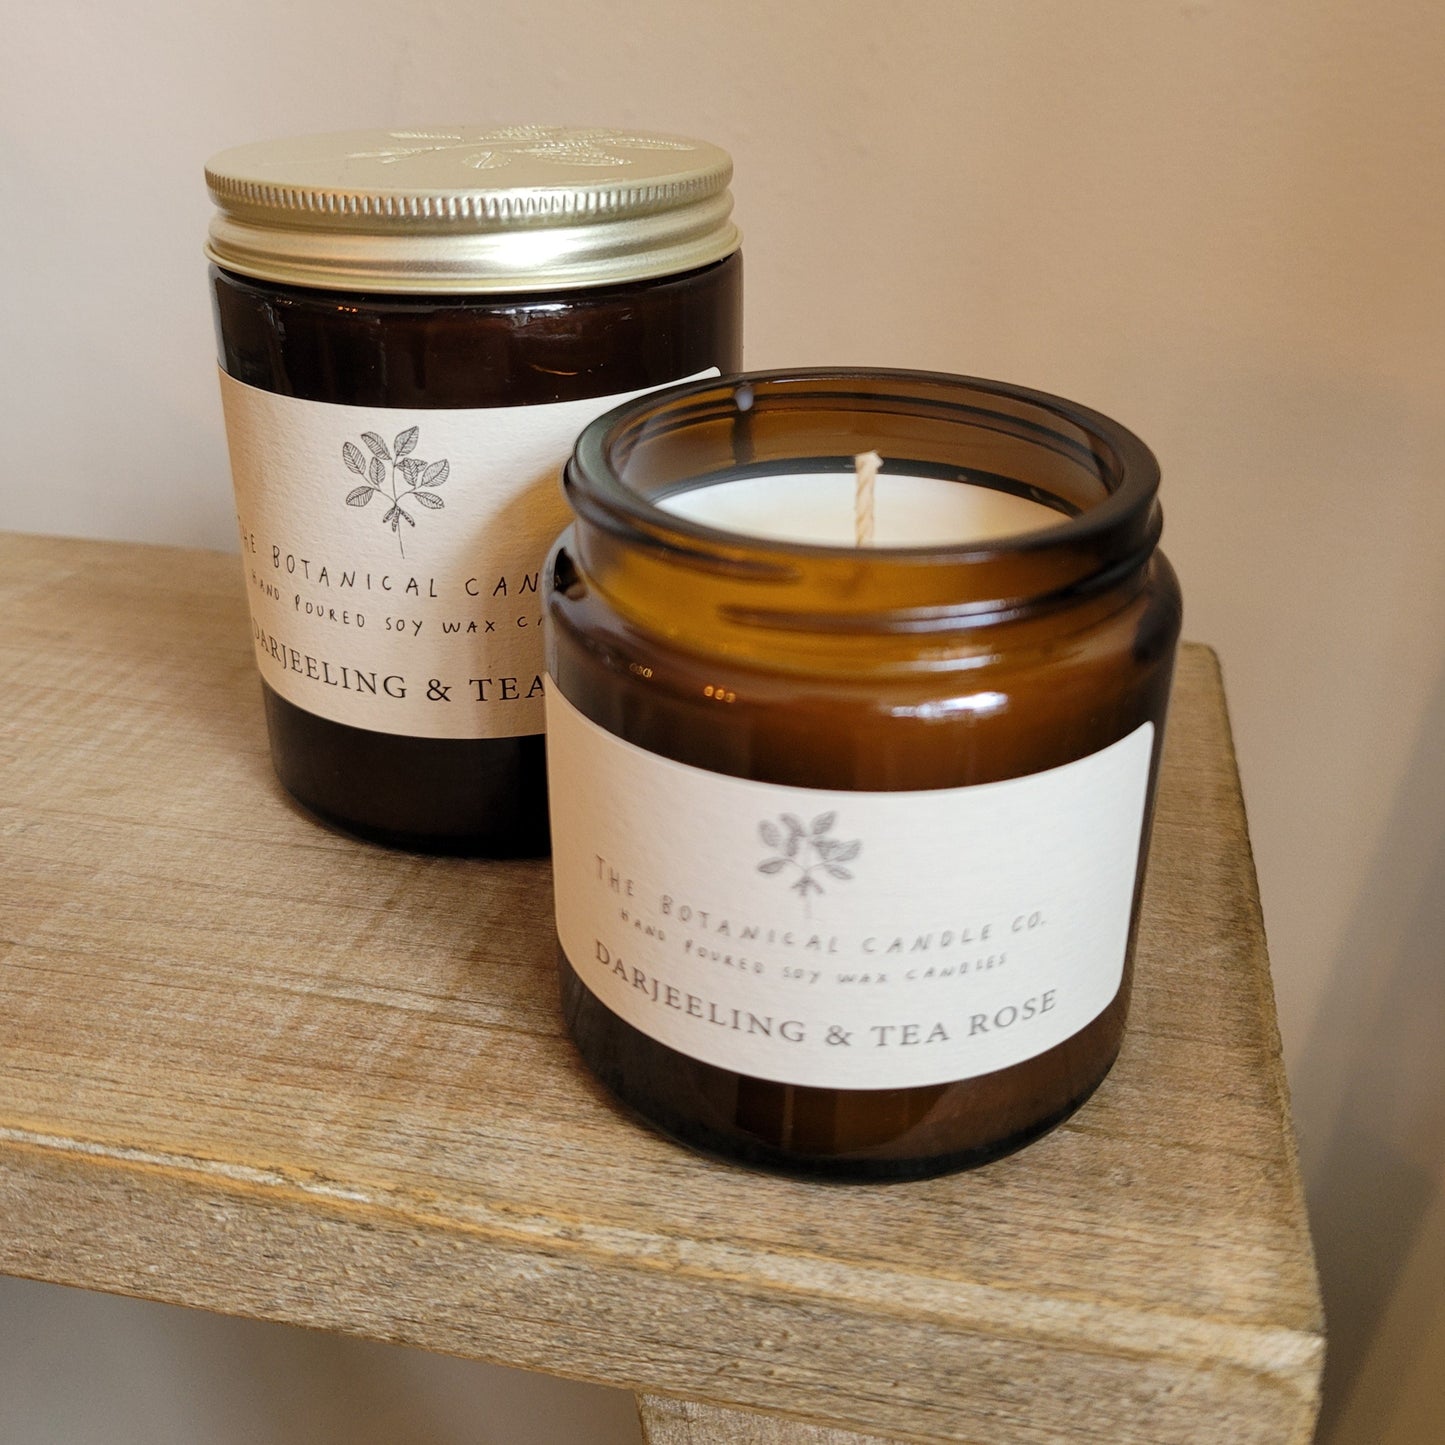 The Botanical Candle Co. Soy Wax Candle- Darjeeling & Tea Rose